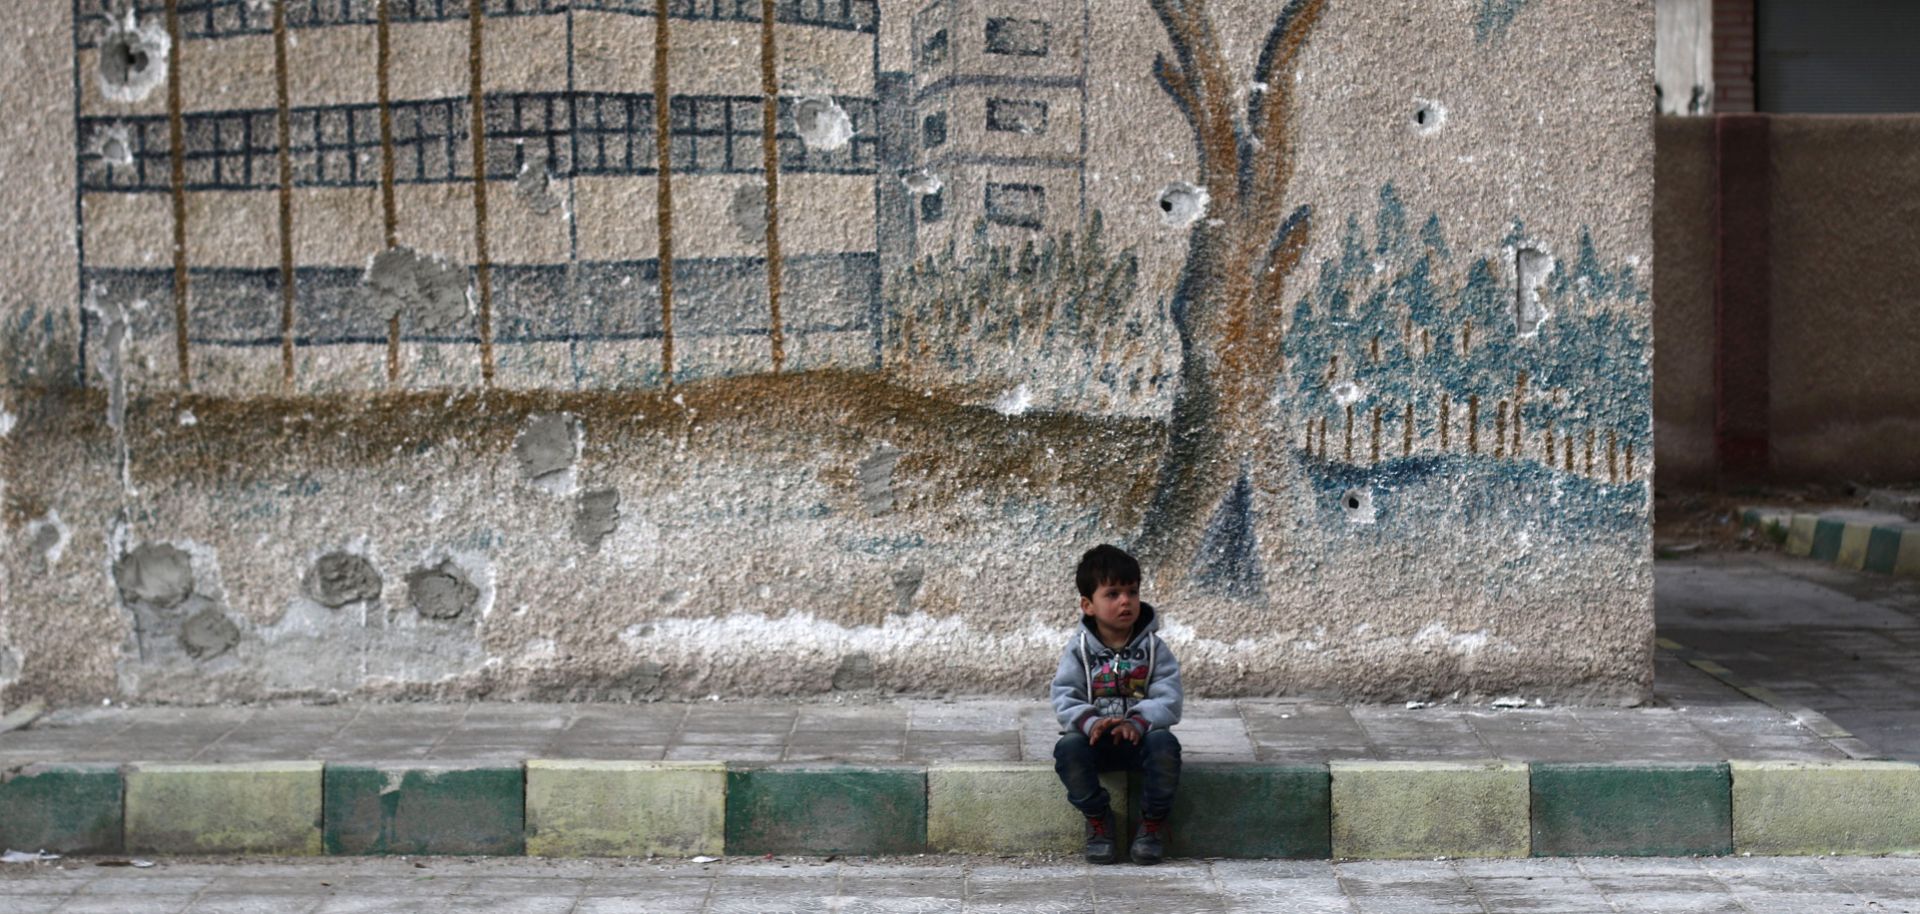 A child sits in front of the bullet-riddled wall of a former school in Syria's eastern Ghouta, a rebel-held area on the outskirts of Damascus, on Jan. 5, 2016.